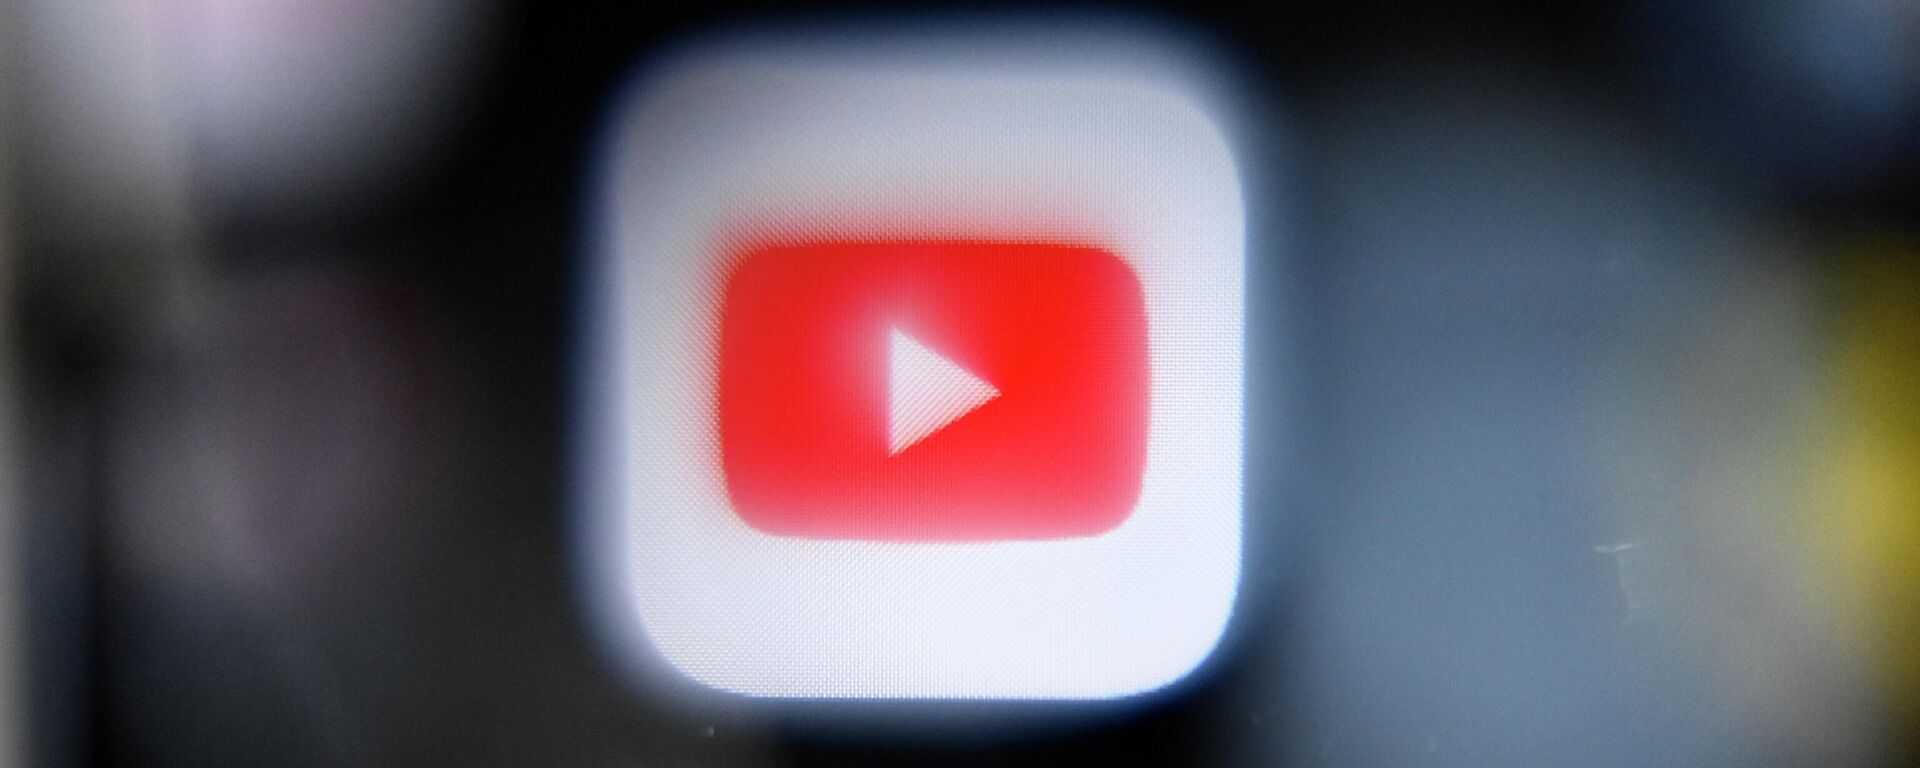 This picture taken in Moscow on October 12, 2021 shows the logo of Youtube social media on a smartphone screen.  - Sputnik International, 1920, 11.03.2022